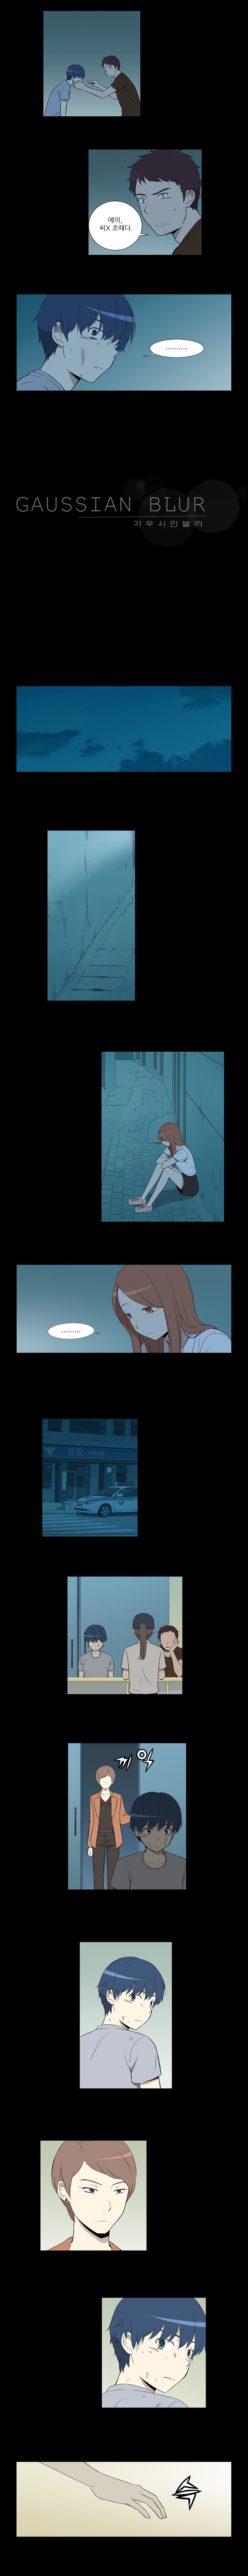 Gaussian Blur - Chapter 29 - Page 2